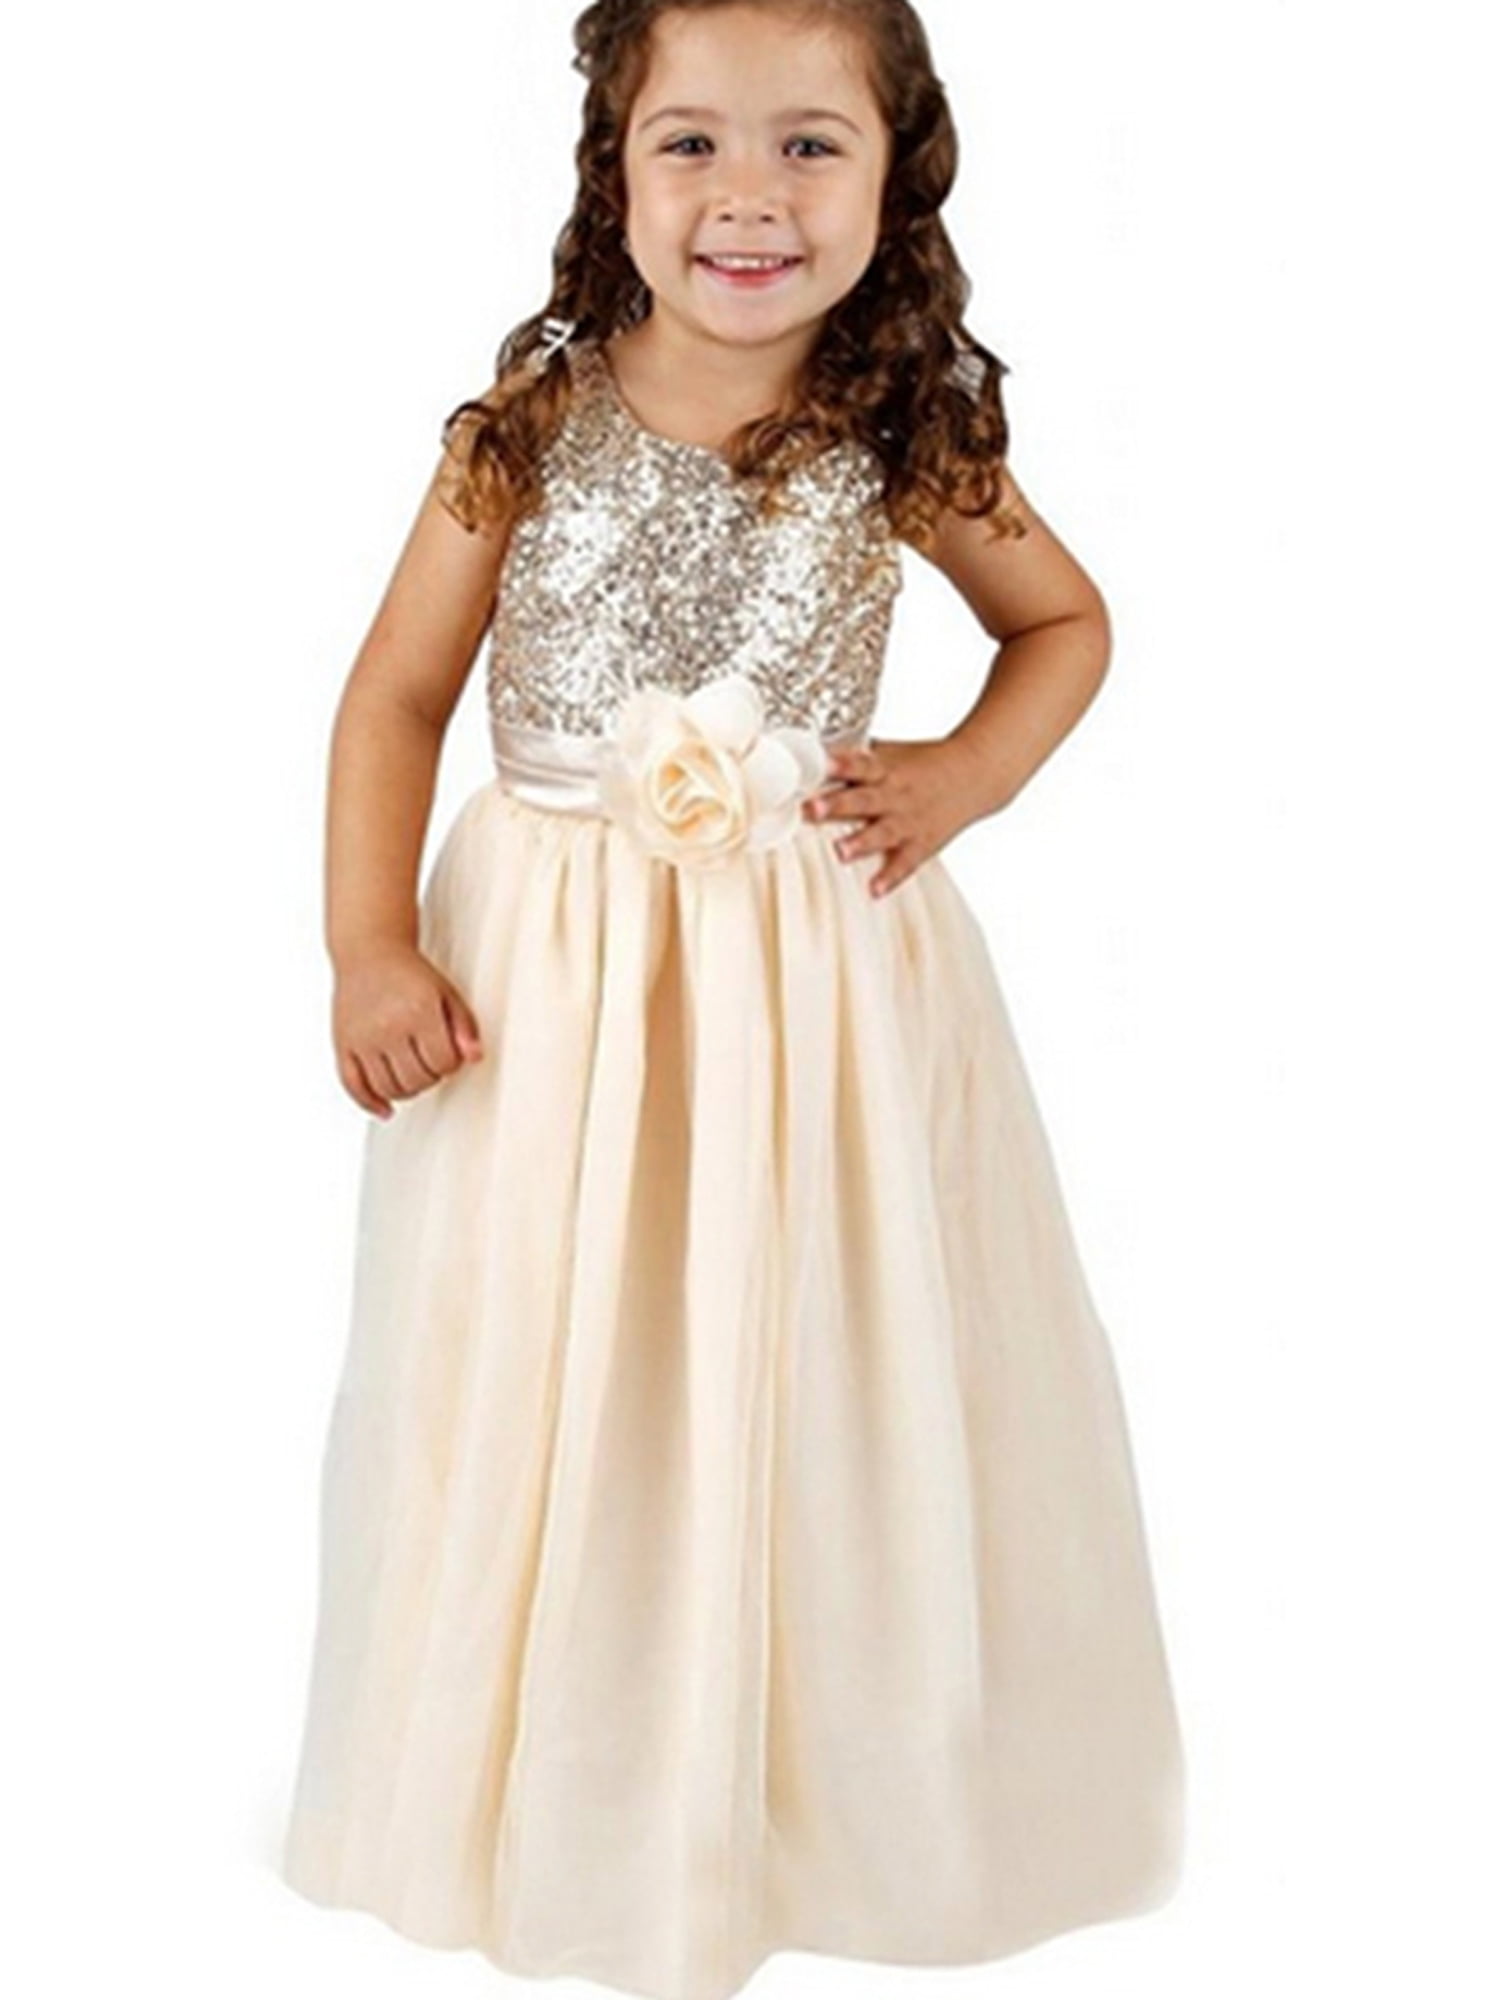 Flower Girl Princess Dress Kids Wedding Party Bridesmaid Prom Sequin Formal Gown 